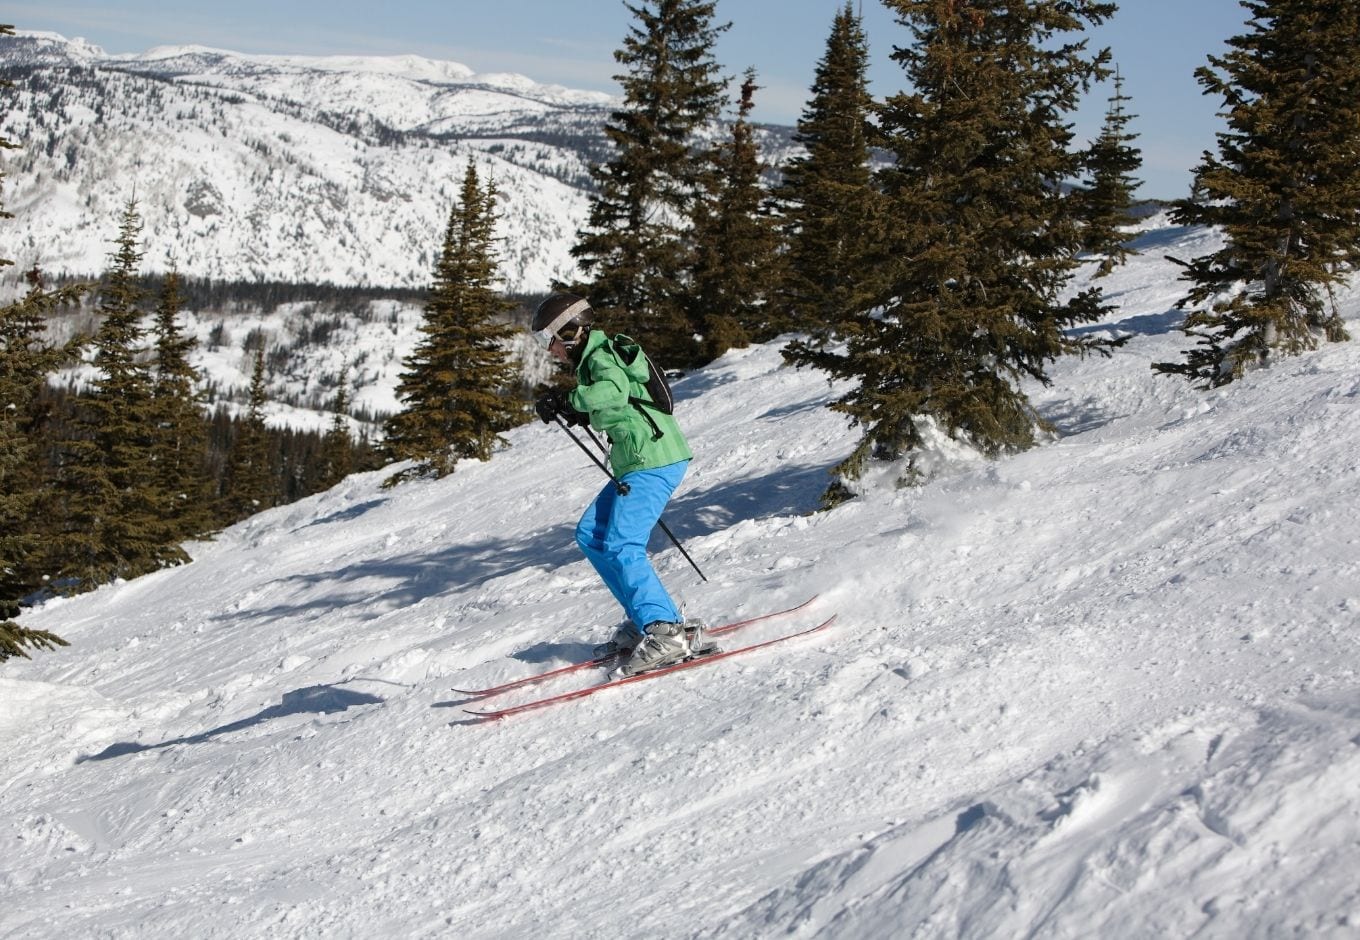 Person downhill skiing at the Steamboat Resort, Colorado.